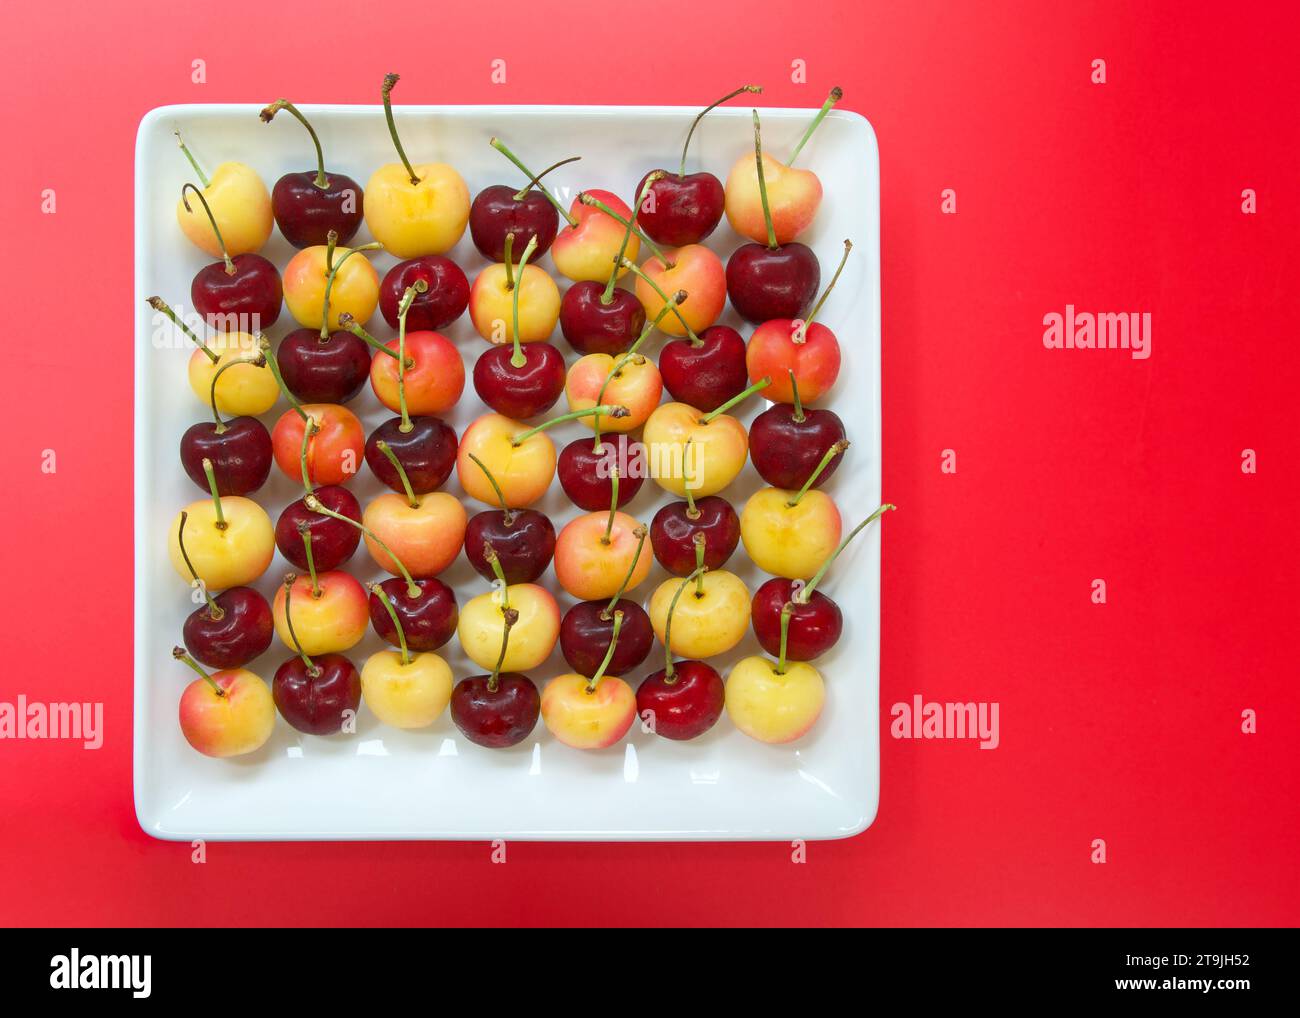 Top view of Bing Cherries and Rainier Cherries with stems lined up on a porcelain plate with red background. Fresh seasonal fruit. Stock Photo